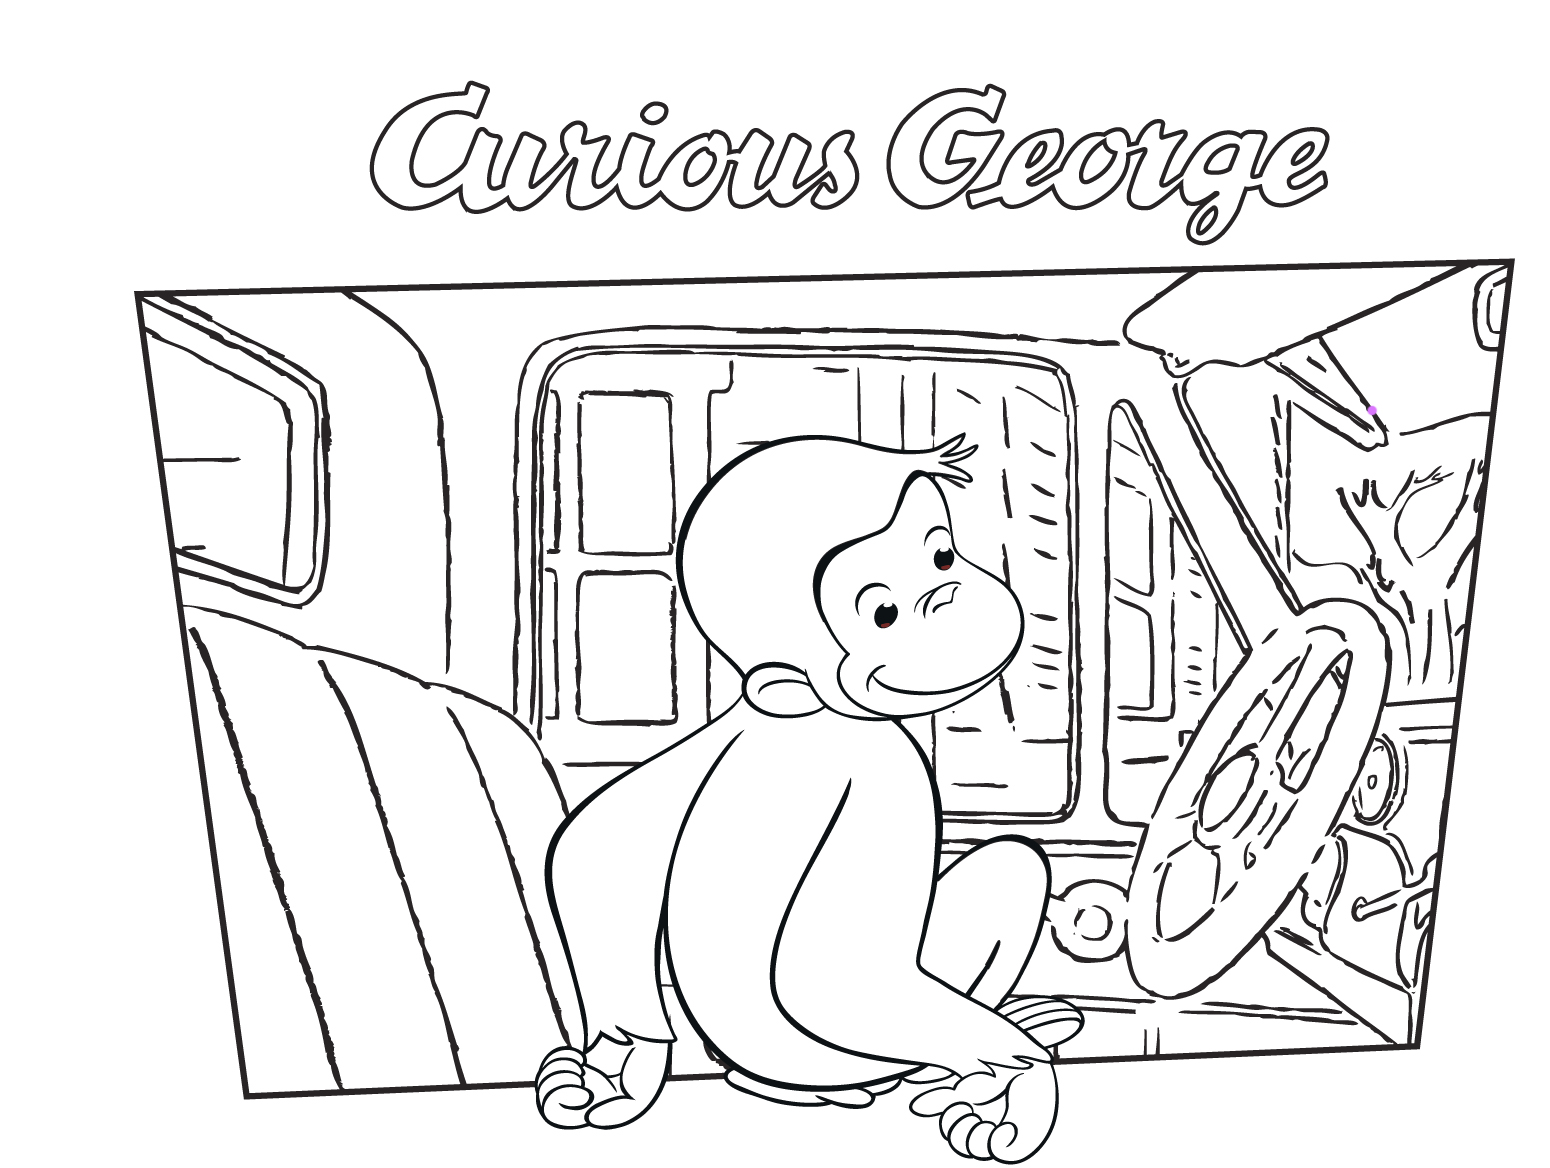 Curious Printable Coloring Pages at Free